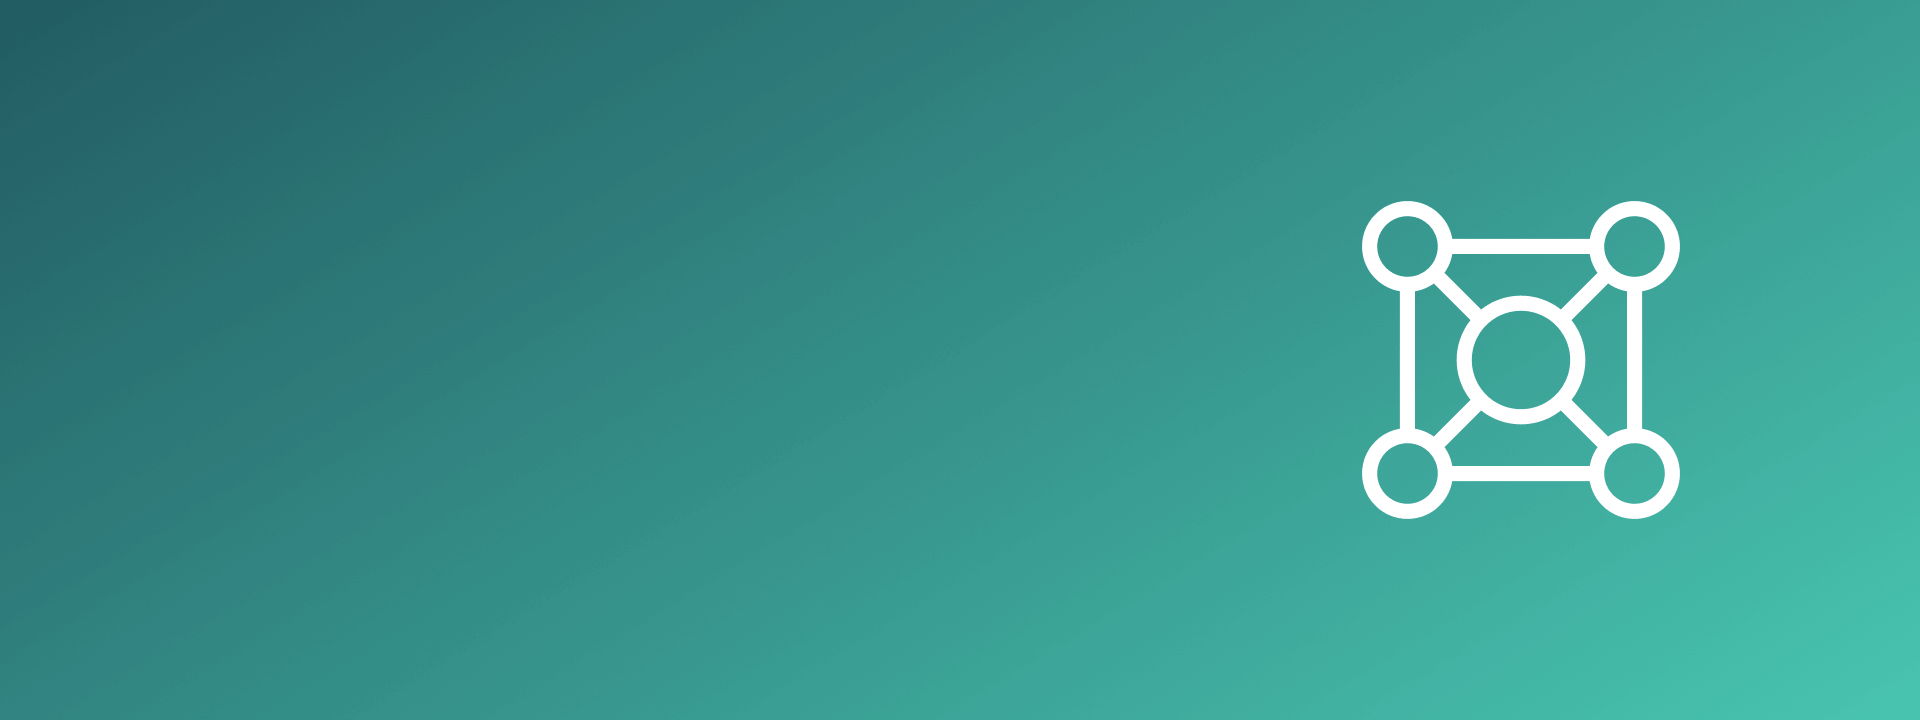 white circle icons connected by lines on a green gradient background